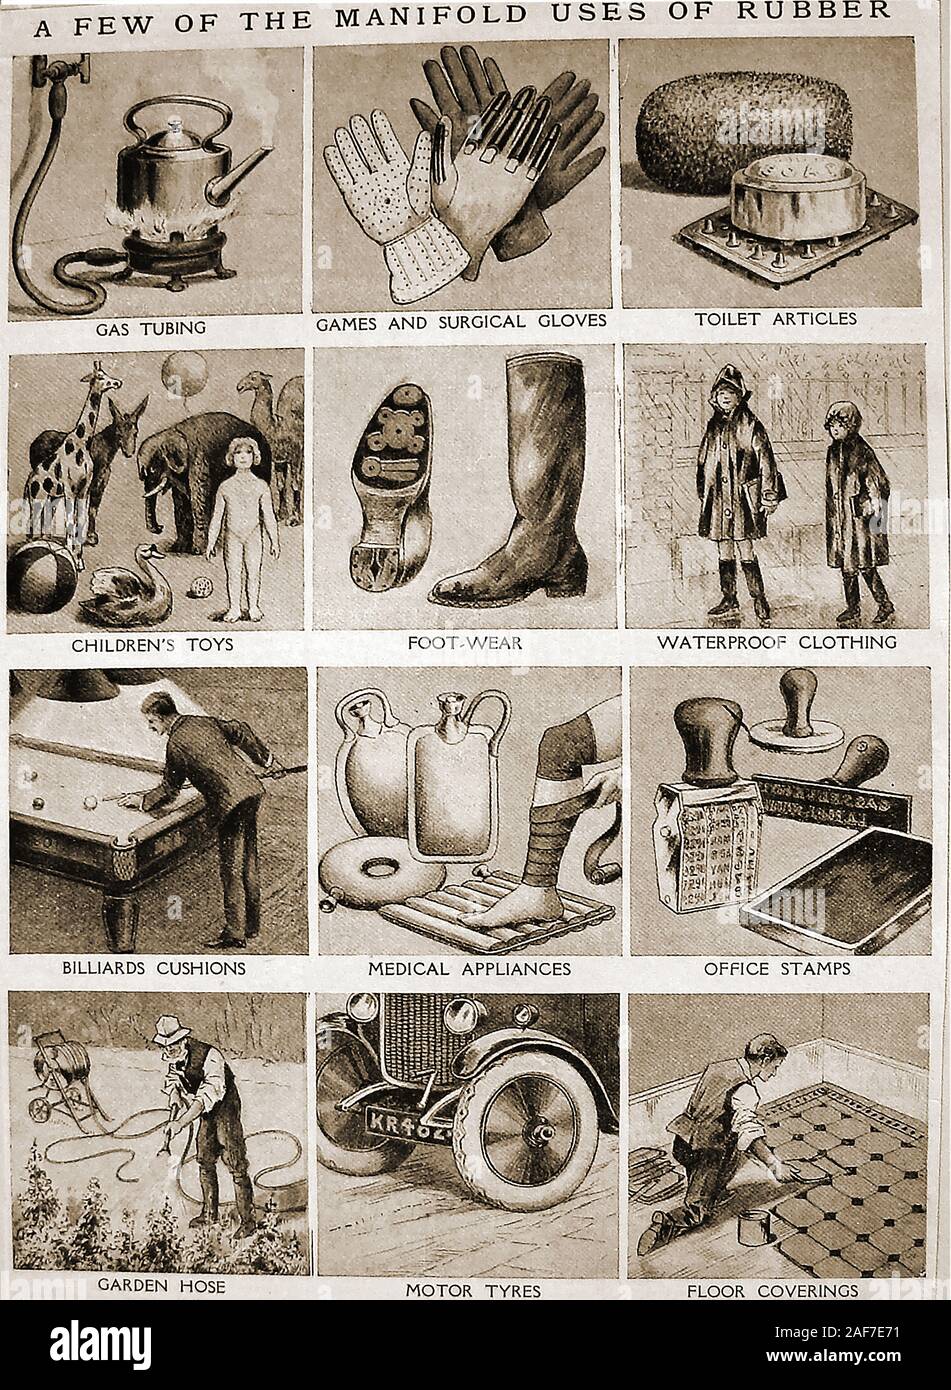 c1930's . A children's book illustration showing uses for rubber at that time -  Gas cooker tubing, games & surgical gloves,toilet articles,toys,footwear,waterproof clothing,billiard cushions,medical appliances,office stamps,garden hoses,car tyres & floor coverings Stock Photo